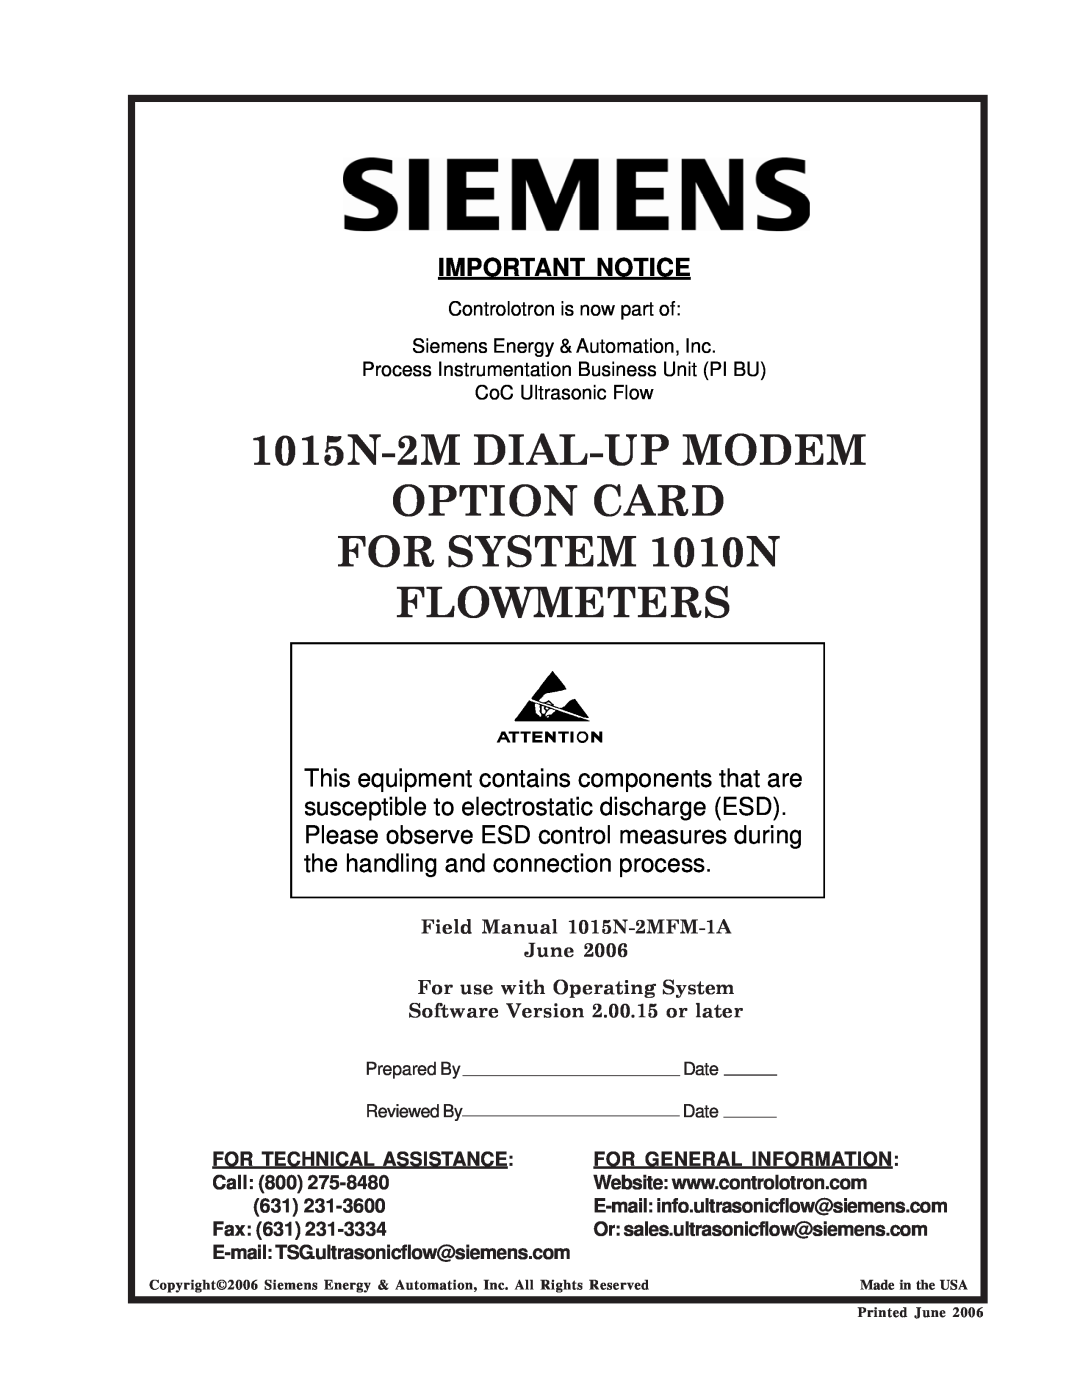 Siemens 1015N-2MFM-1A 1015N-2M DIAL-UP MODEM OPTION CARD FOR SYSTEM 1010N FLOWMETERS, Important Notice, Call 800, Fax 631 